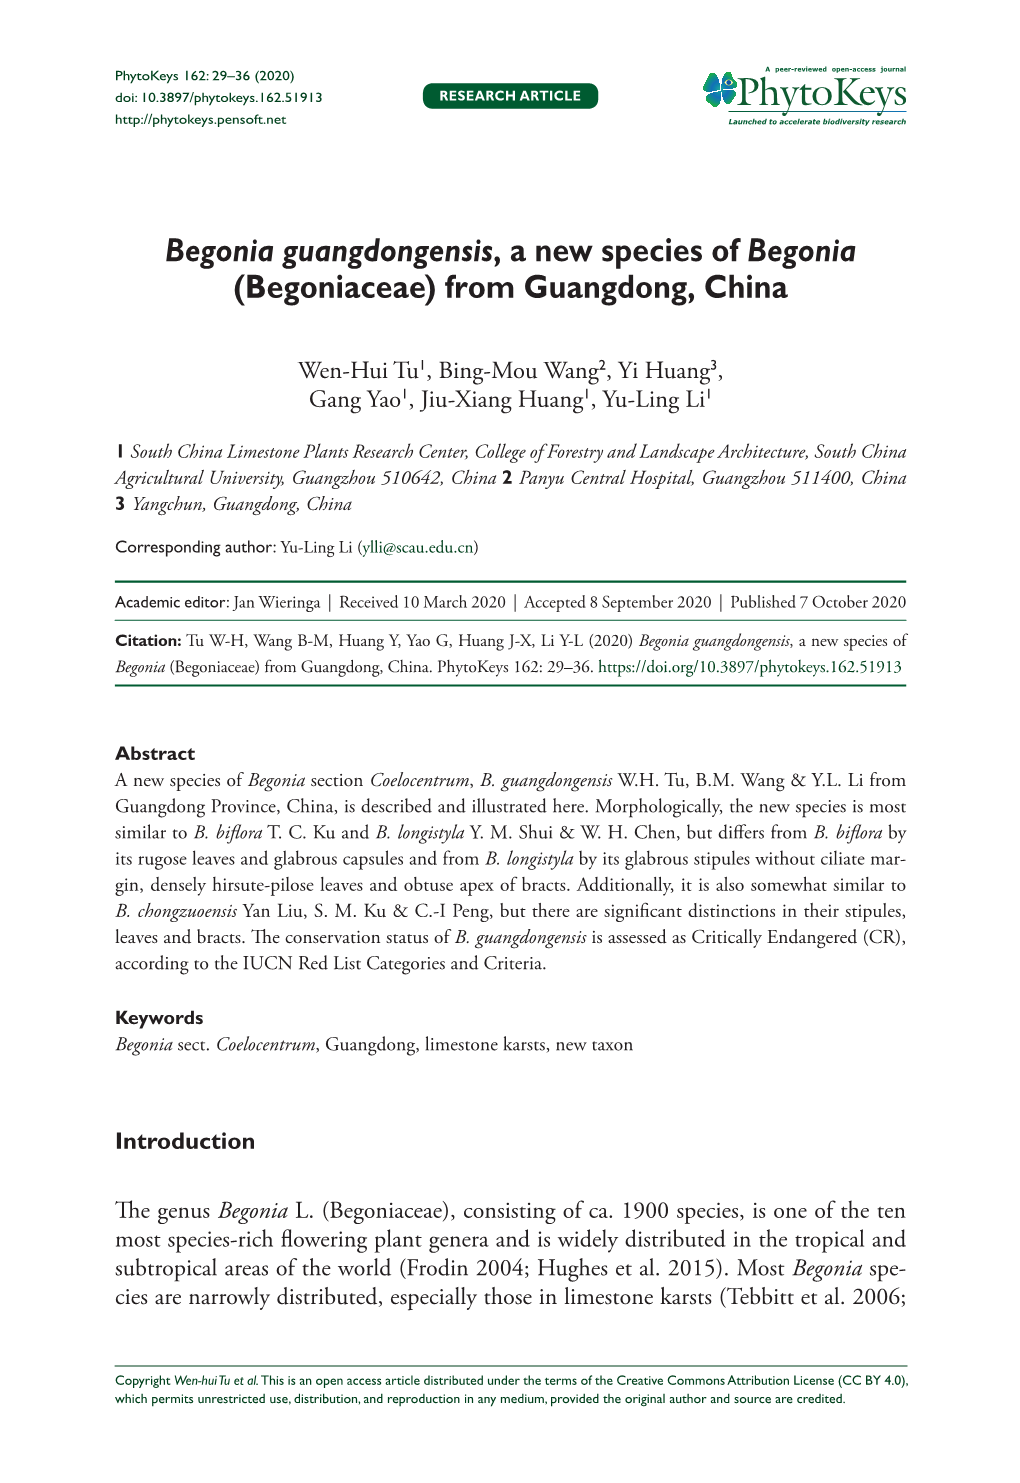 Begonia Guangdongensis, a New Species of Begonia (Begoniaceae) from Guangdong, China